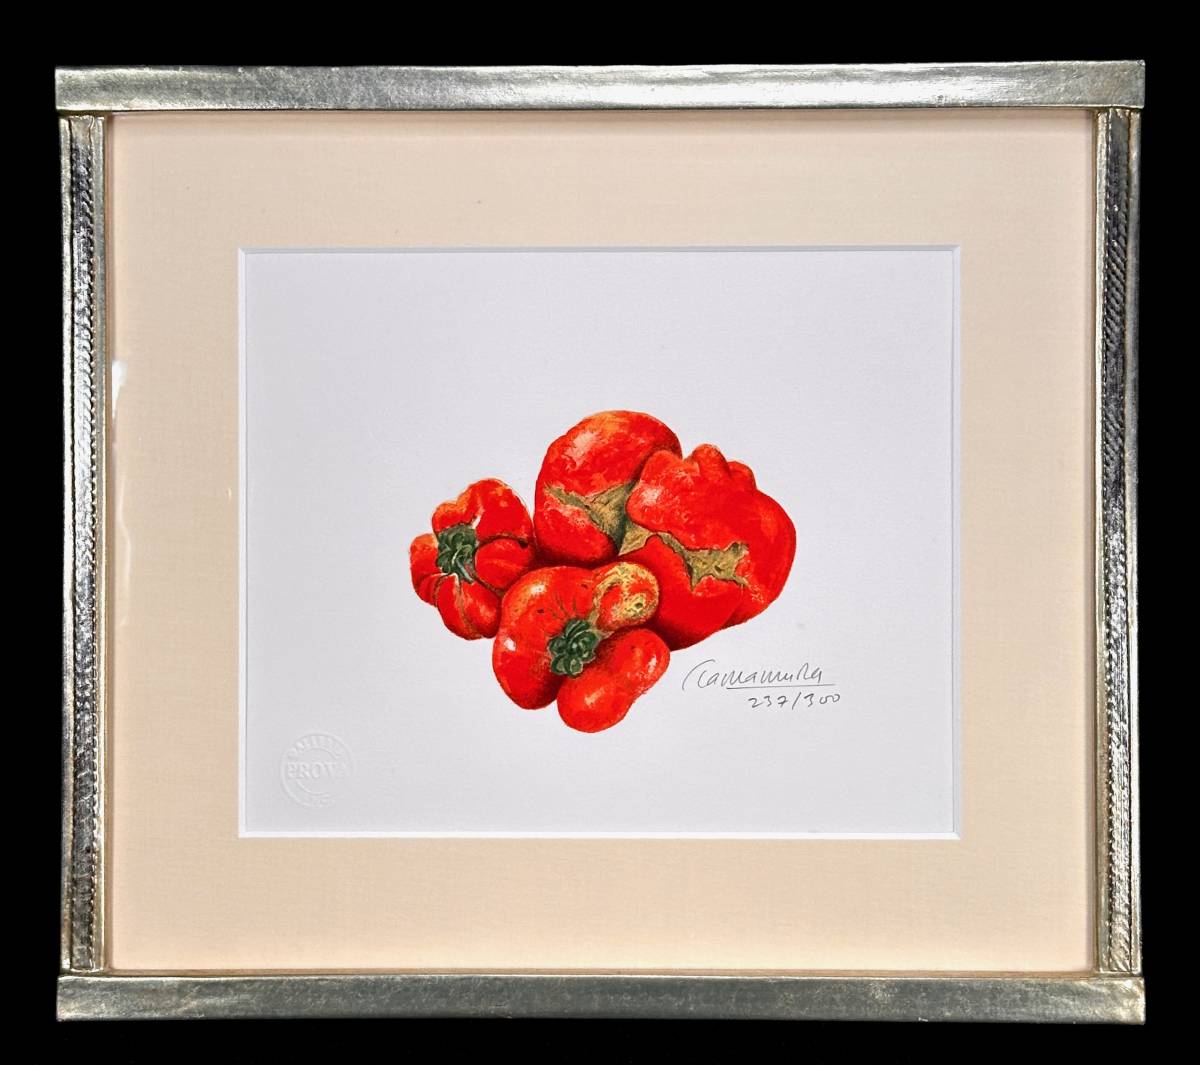 [Authentic] Toyoo Tamamura Lithograph Deformed Tomato 237/300 Still Life Painting Framed Signed Width 42cm Height 37.5cm, Artwork, Prints, Lithography, Lithograph